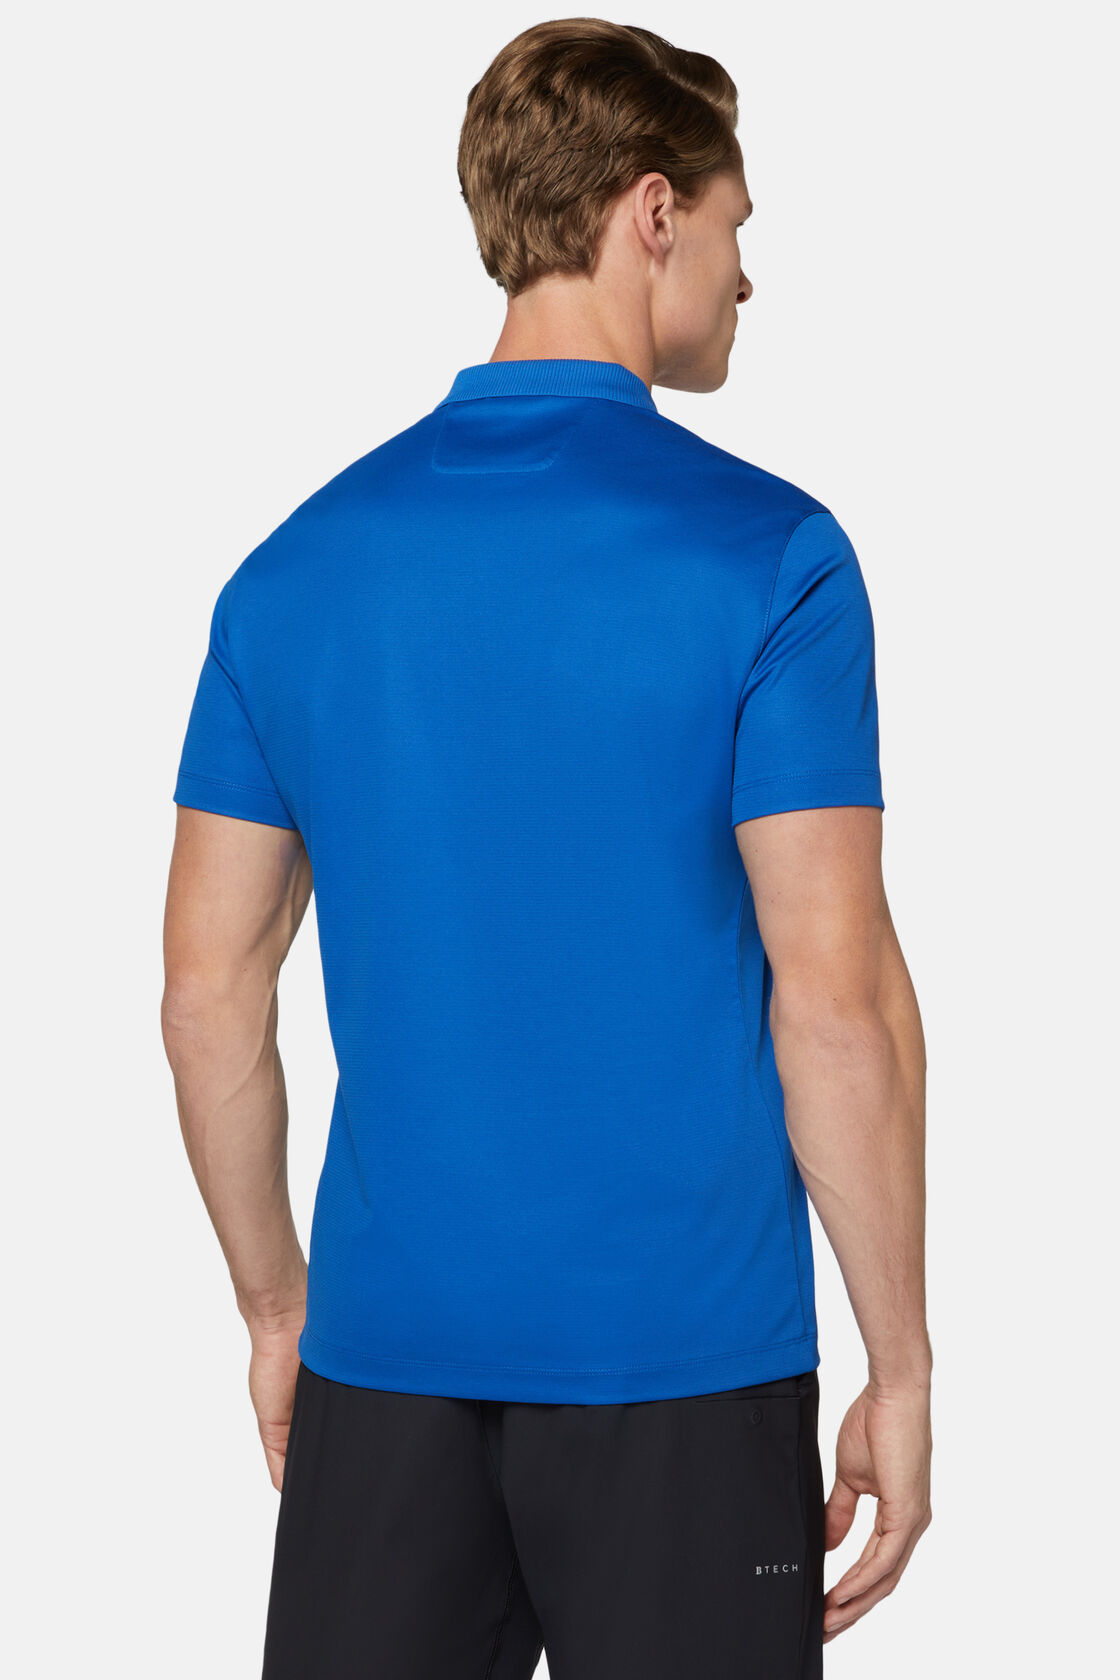 Polo Shirt in Sustainable High-Performance Fabric, Royal blue, hi-res